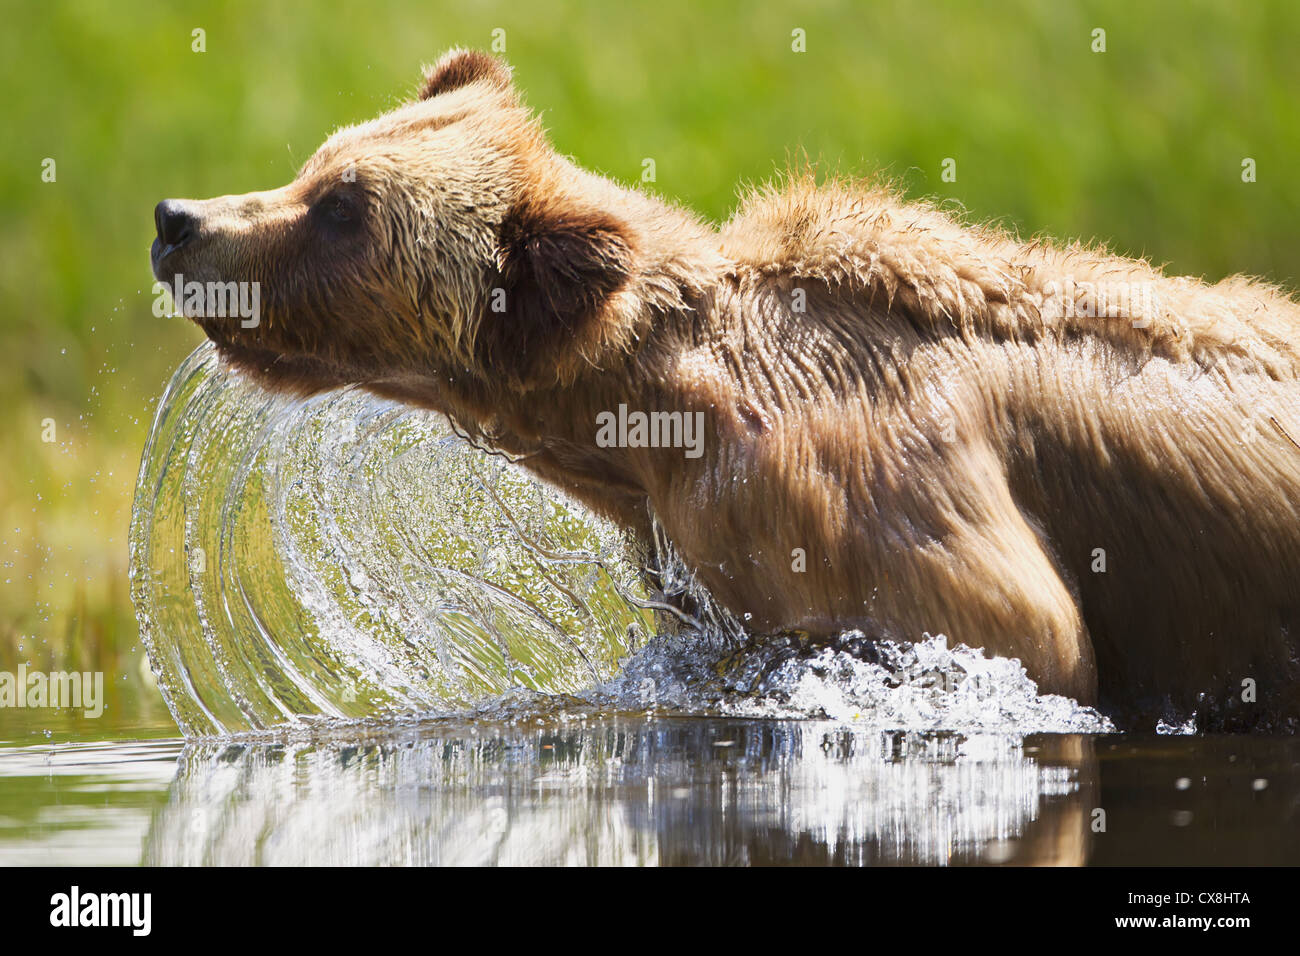 Grizzly bear emerges from the water at the khutzeymateen grizzly bear sanctuary near prince rupert;British columbia canada Stock Photo